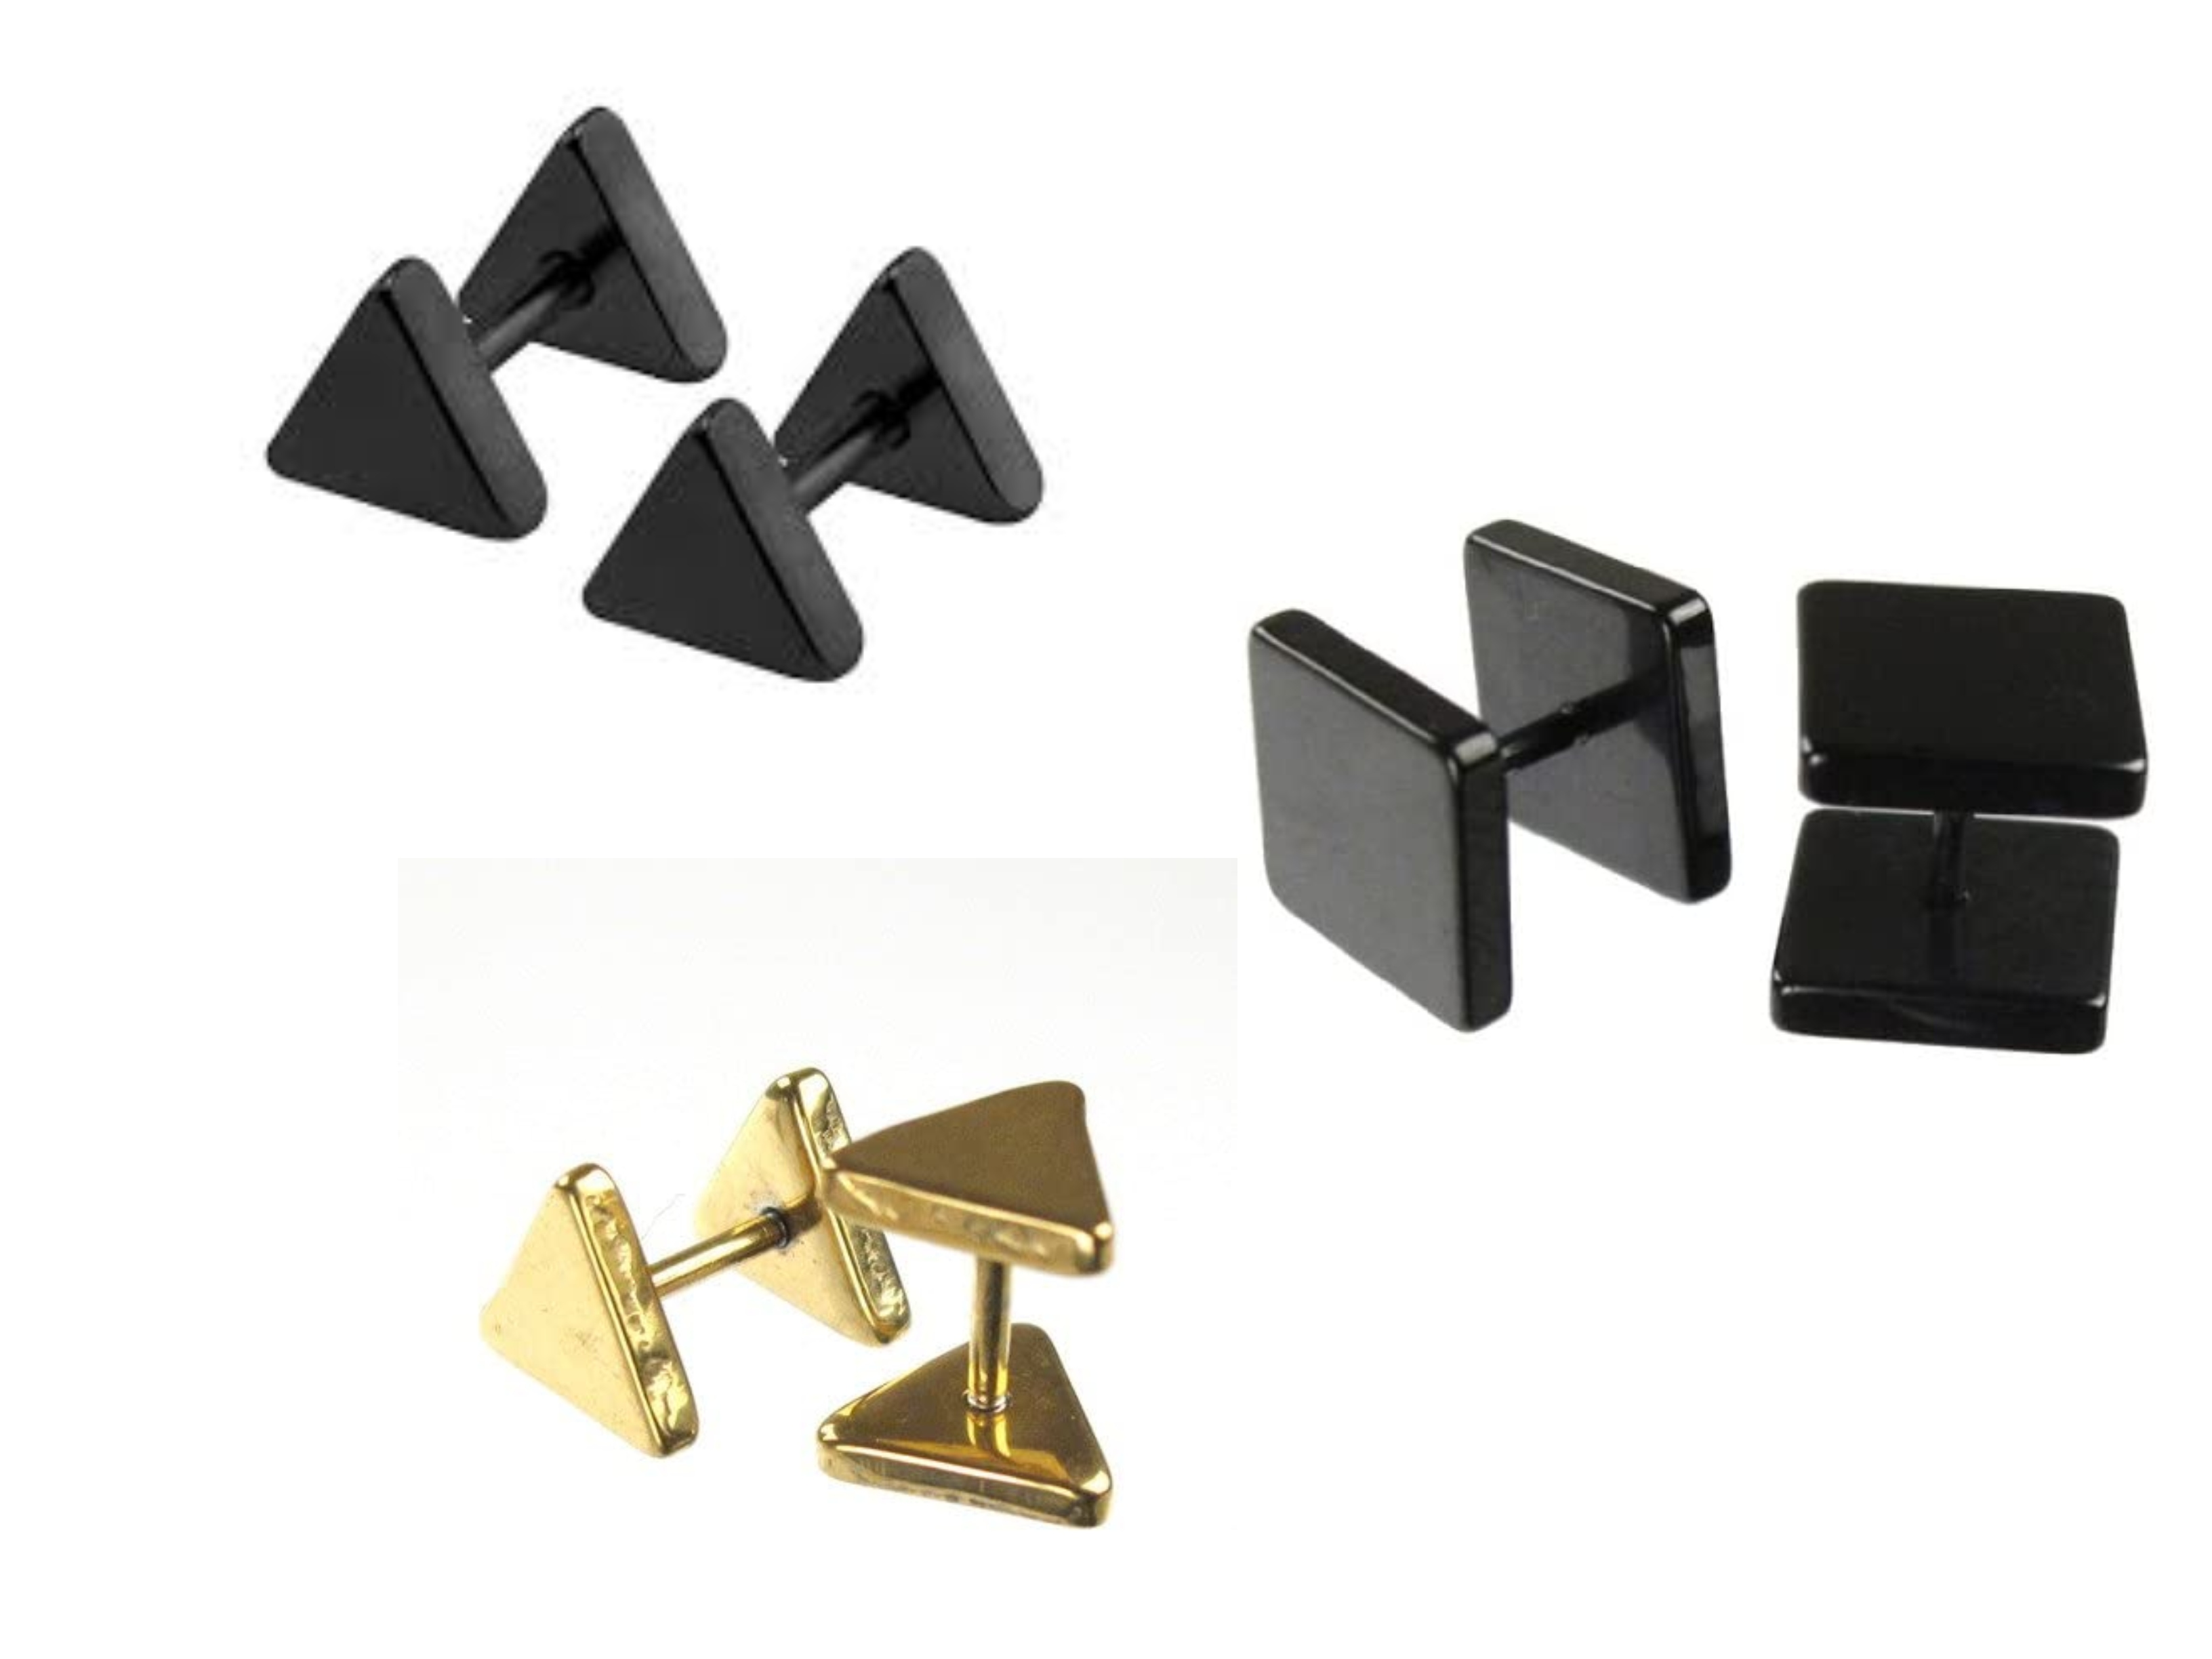 Wholesale Joblot Of 50 Black & Gold Stainless Steel Triangle & Square Stud Earrings